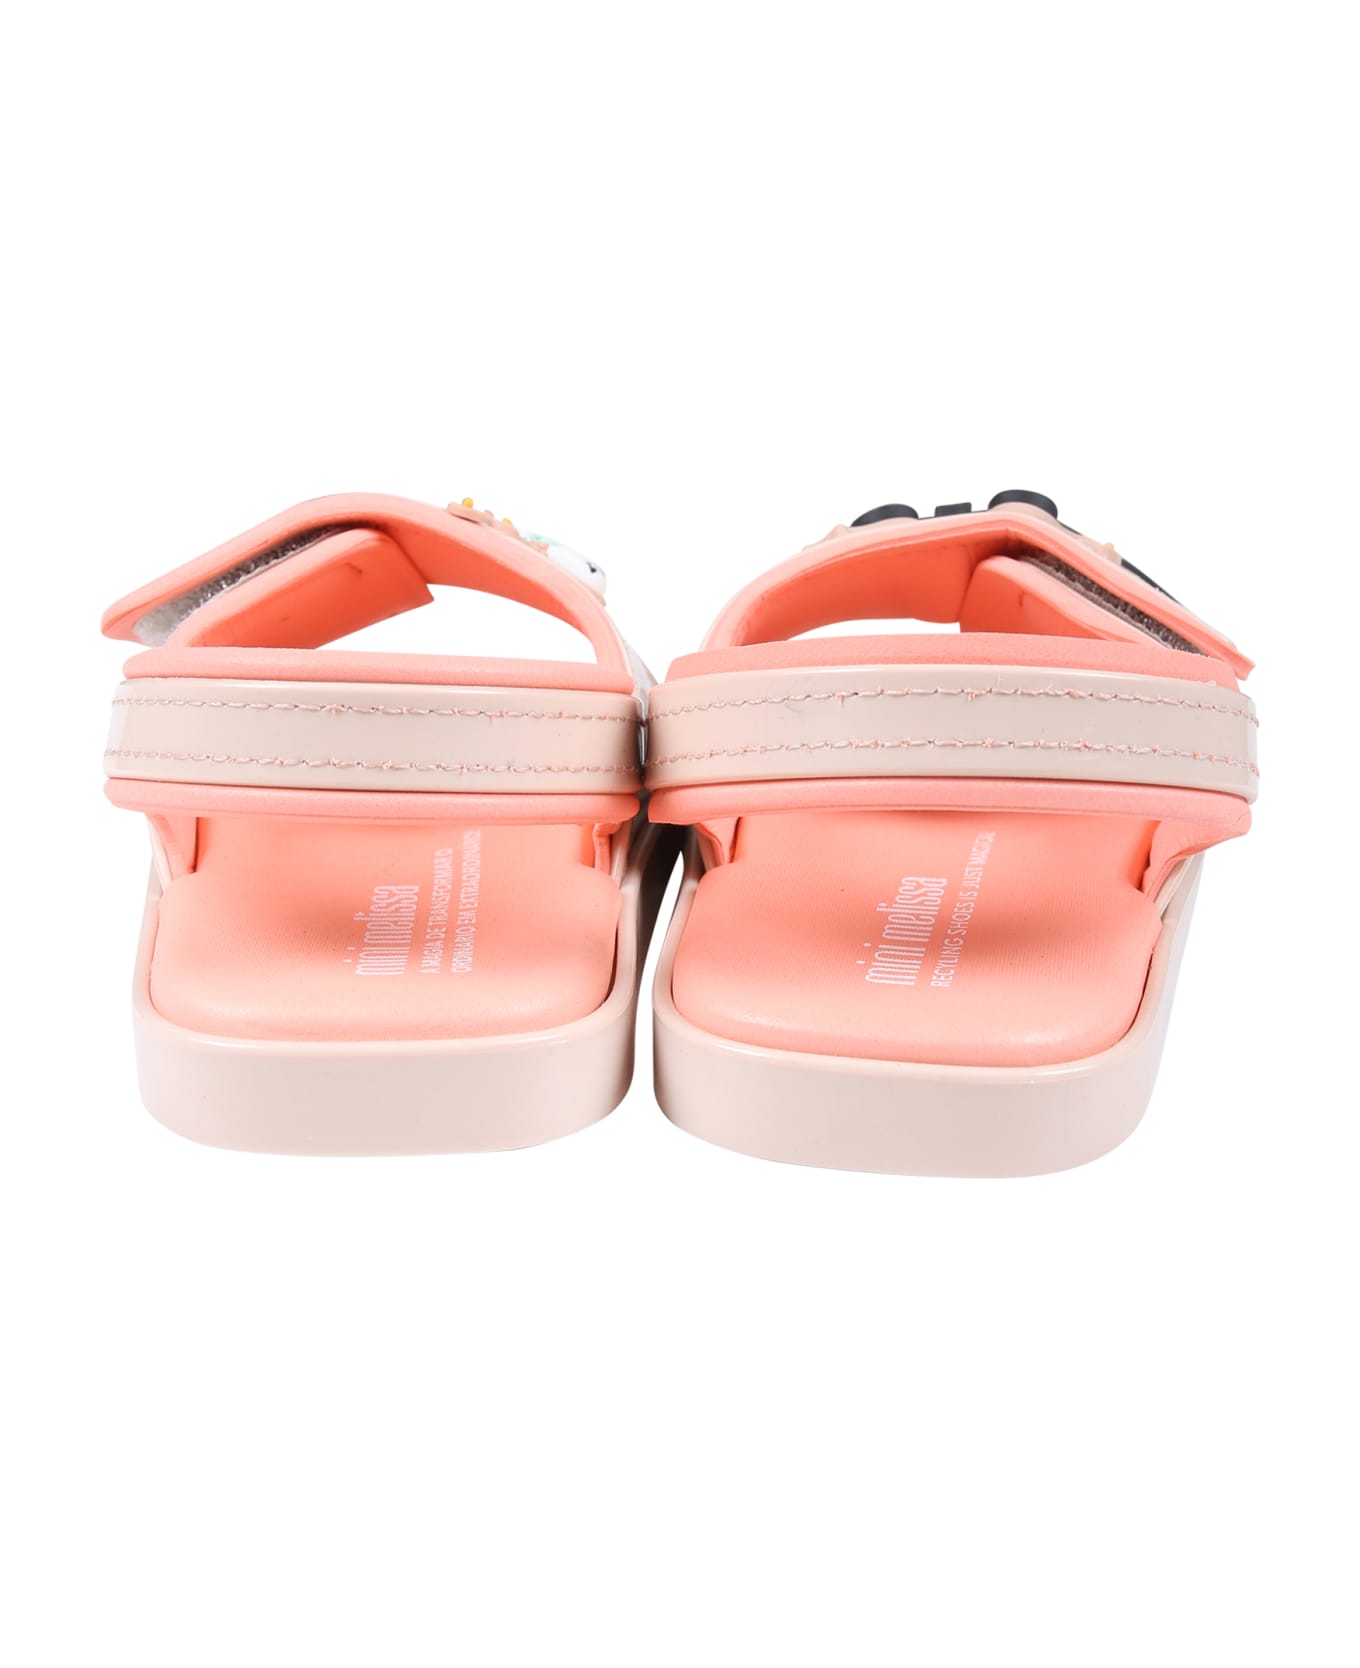 Melissa Pink Sandals For Girl With Rainbow And Unicorn - Pink シューズ